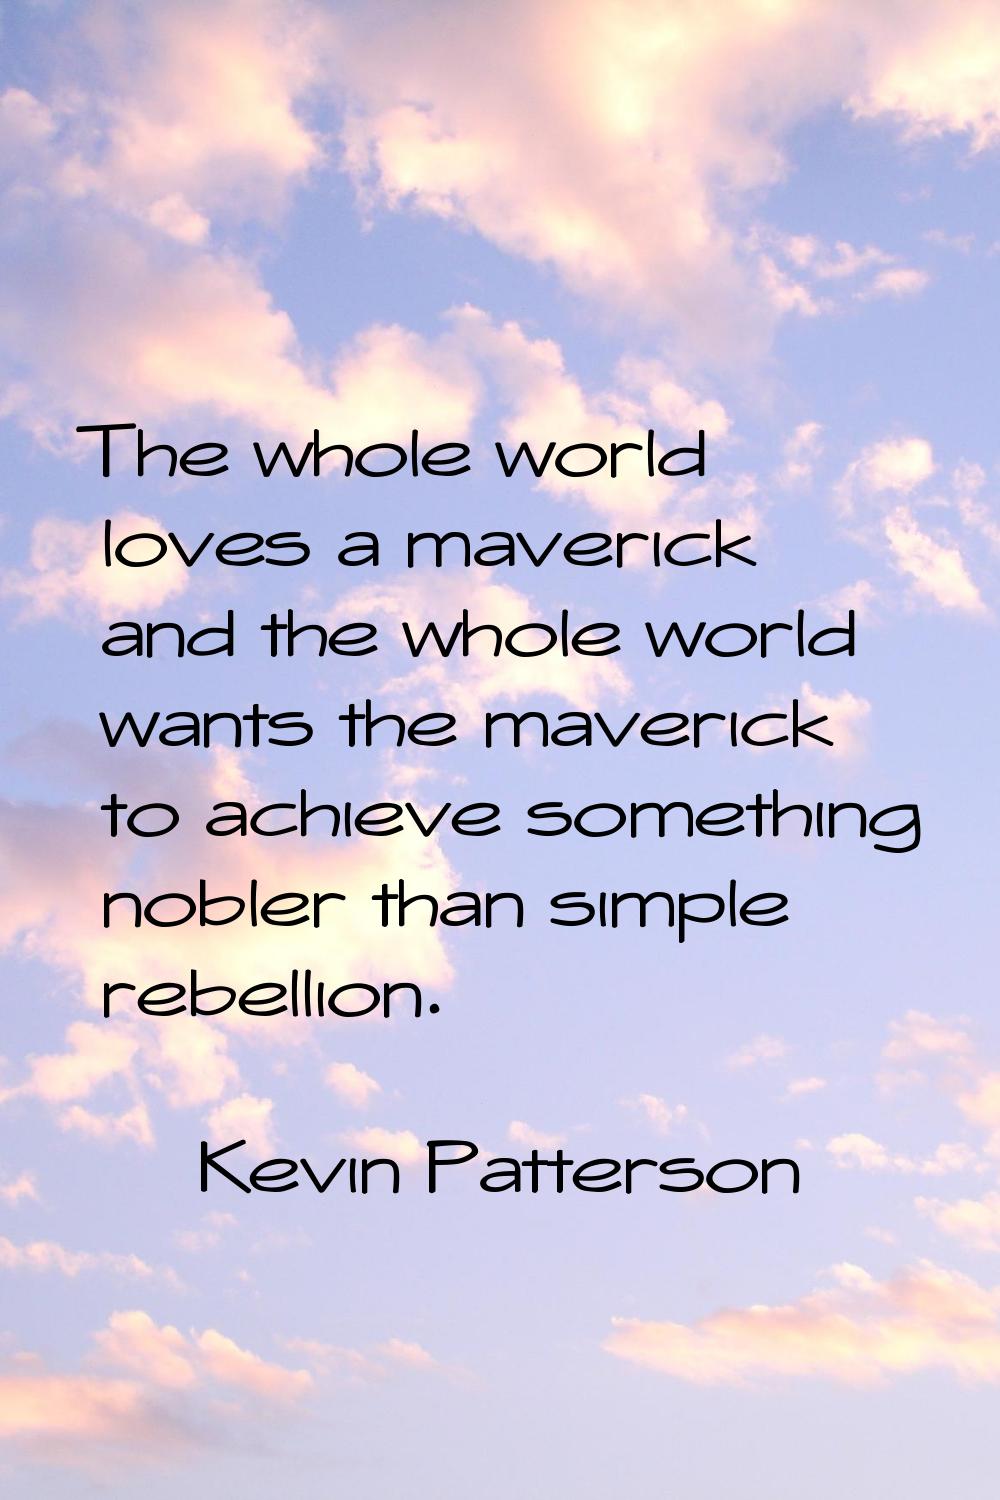 The whole world loves a maverick and the whole world wants the maverick to achieve something nobler